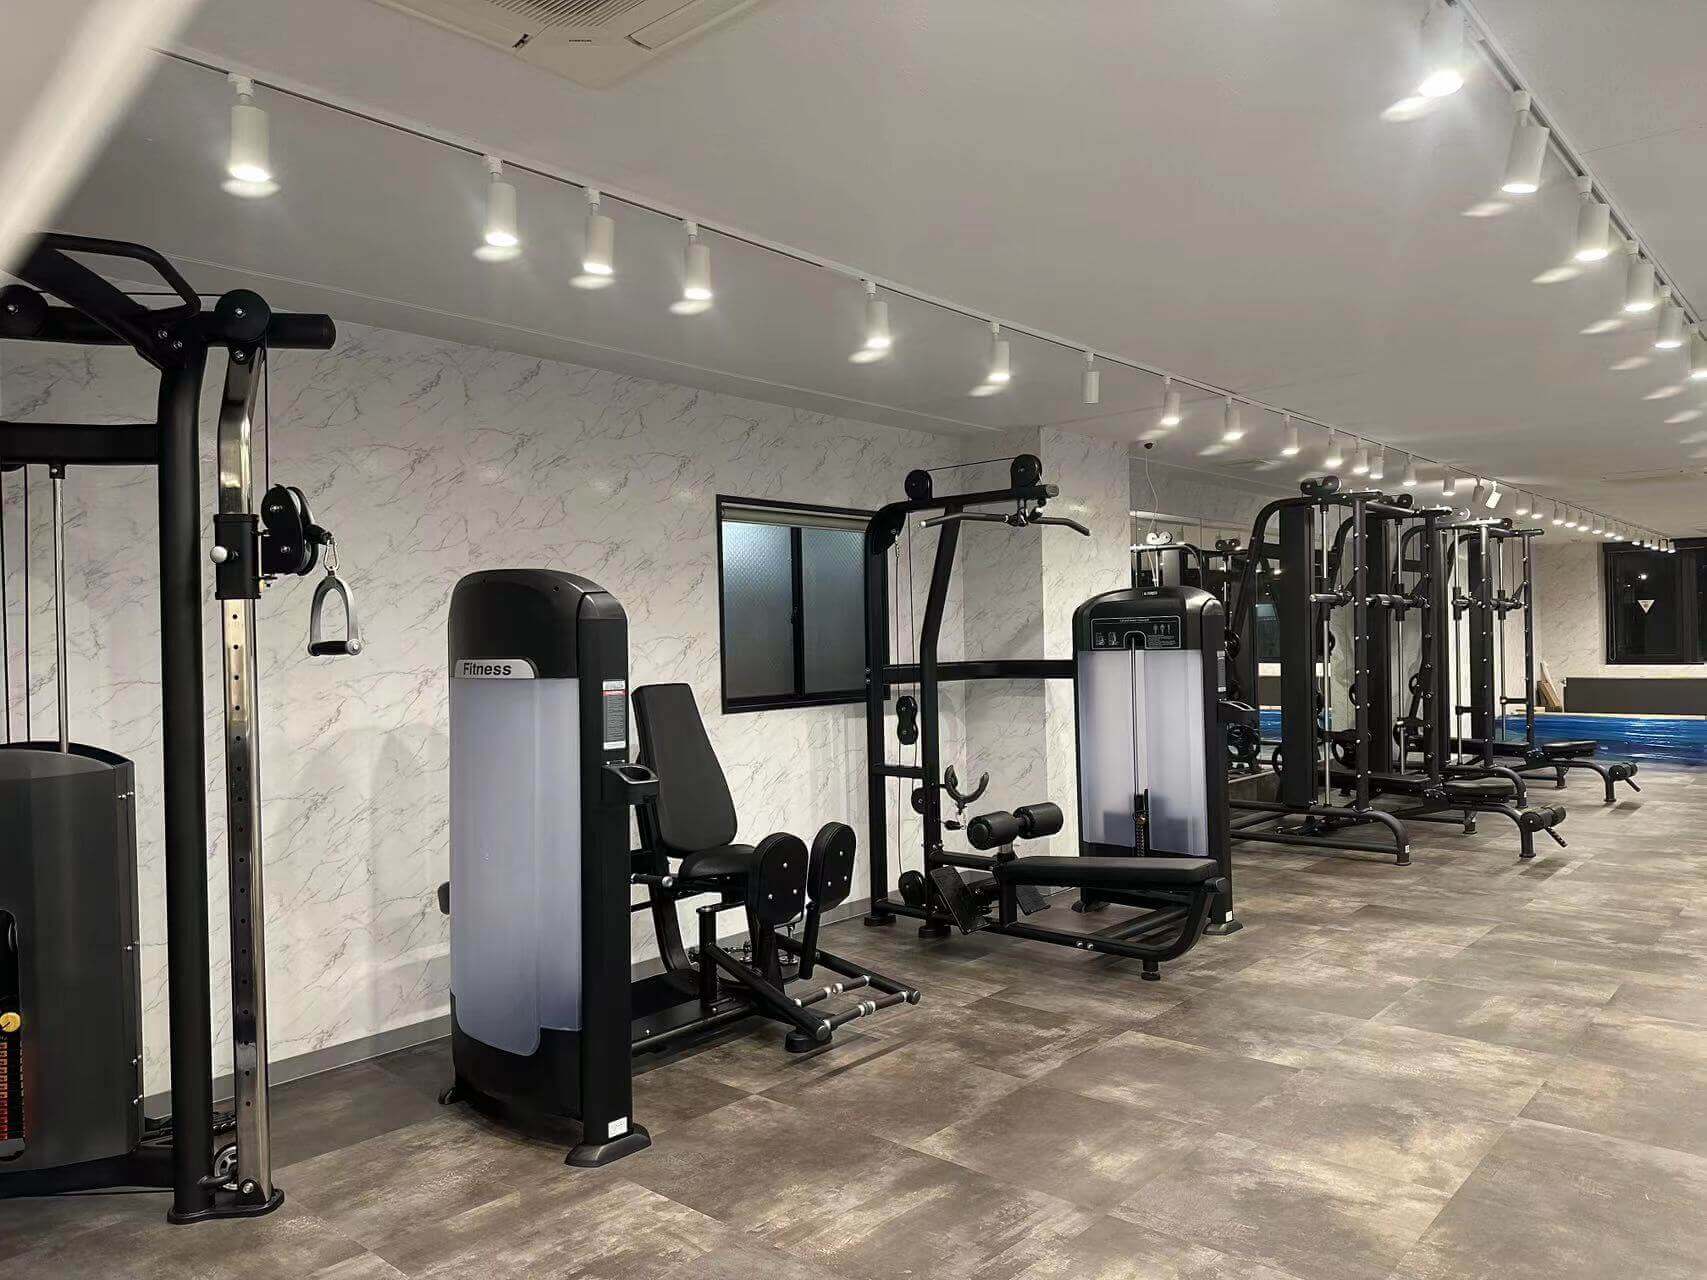 A+dietgym名古屋店